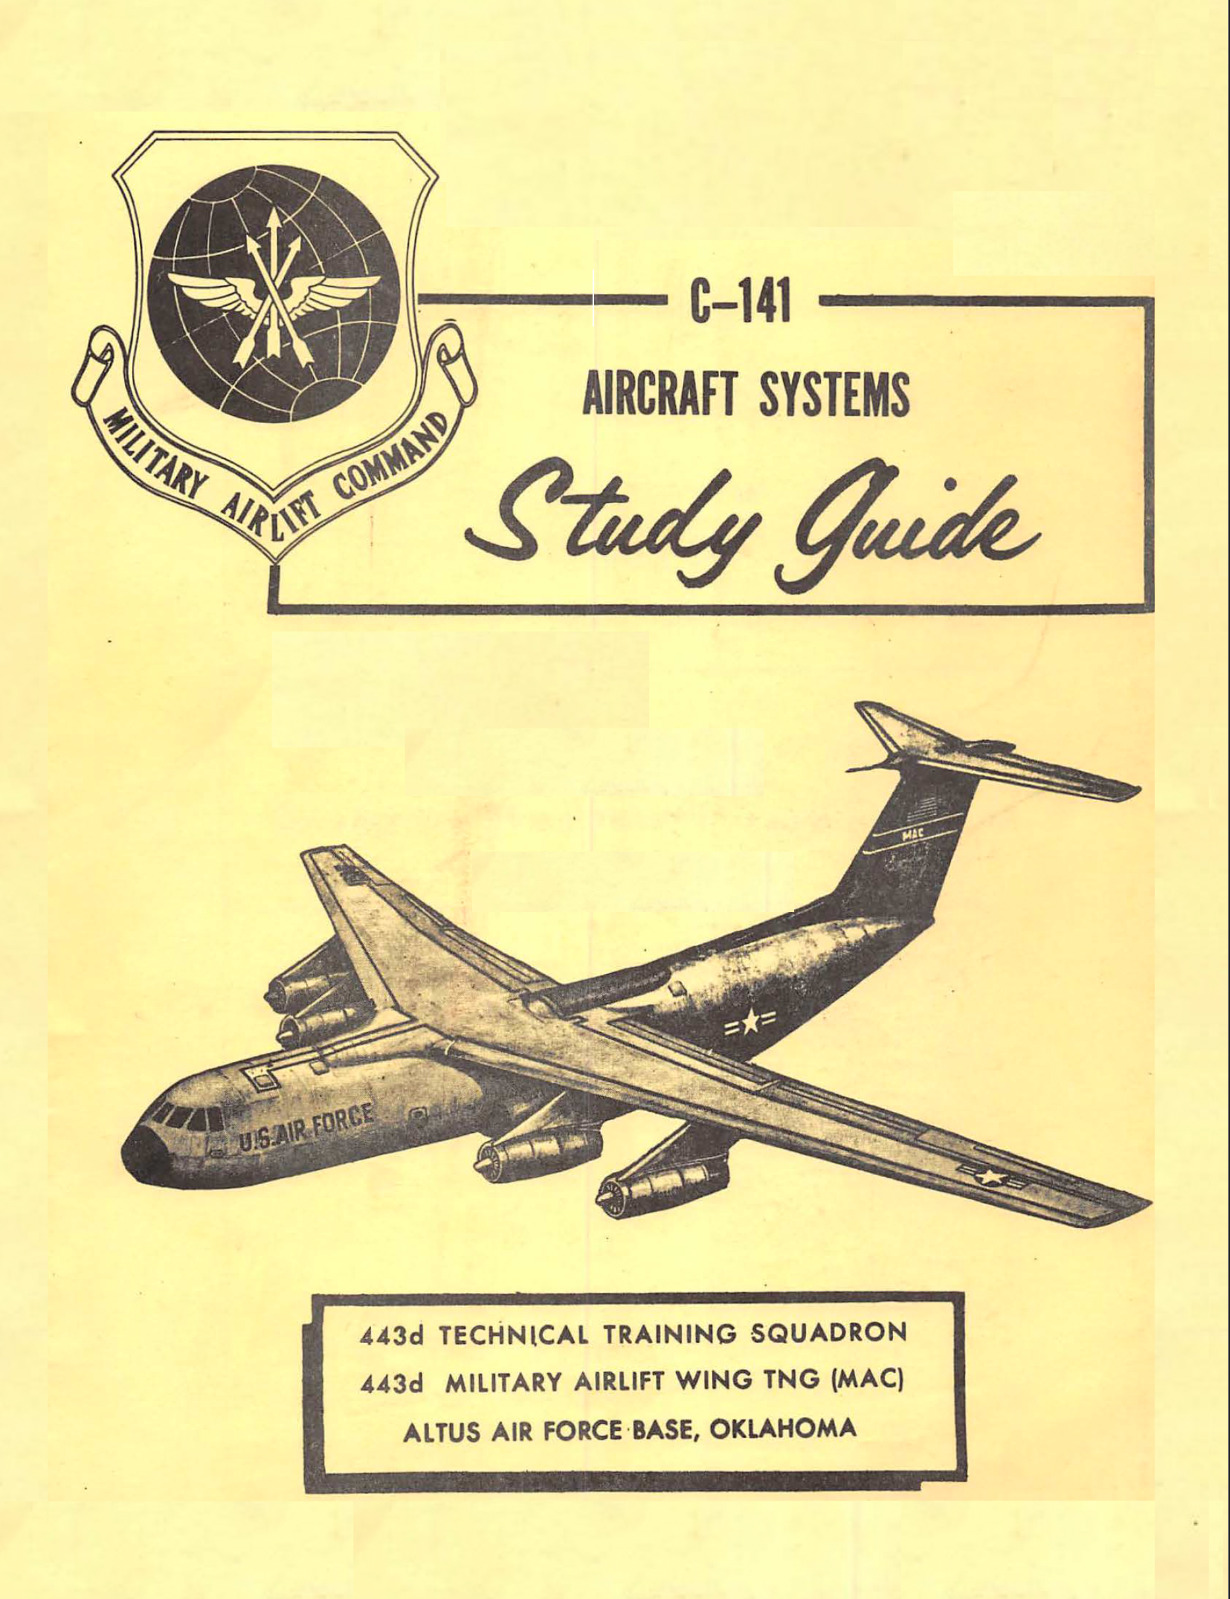 292 Page 1971 C-141 Starlifter Aircraft Systems Altus AFB Study Guide on CD